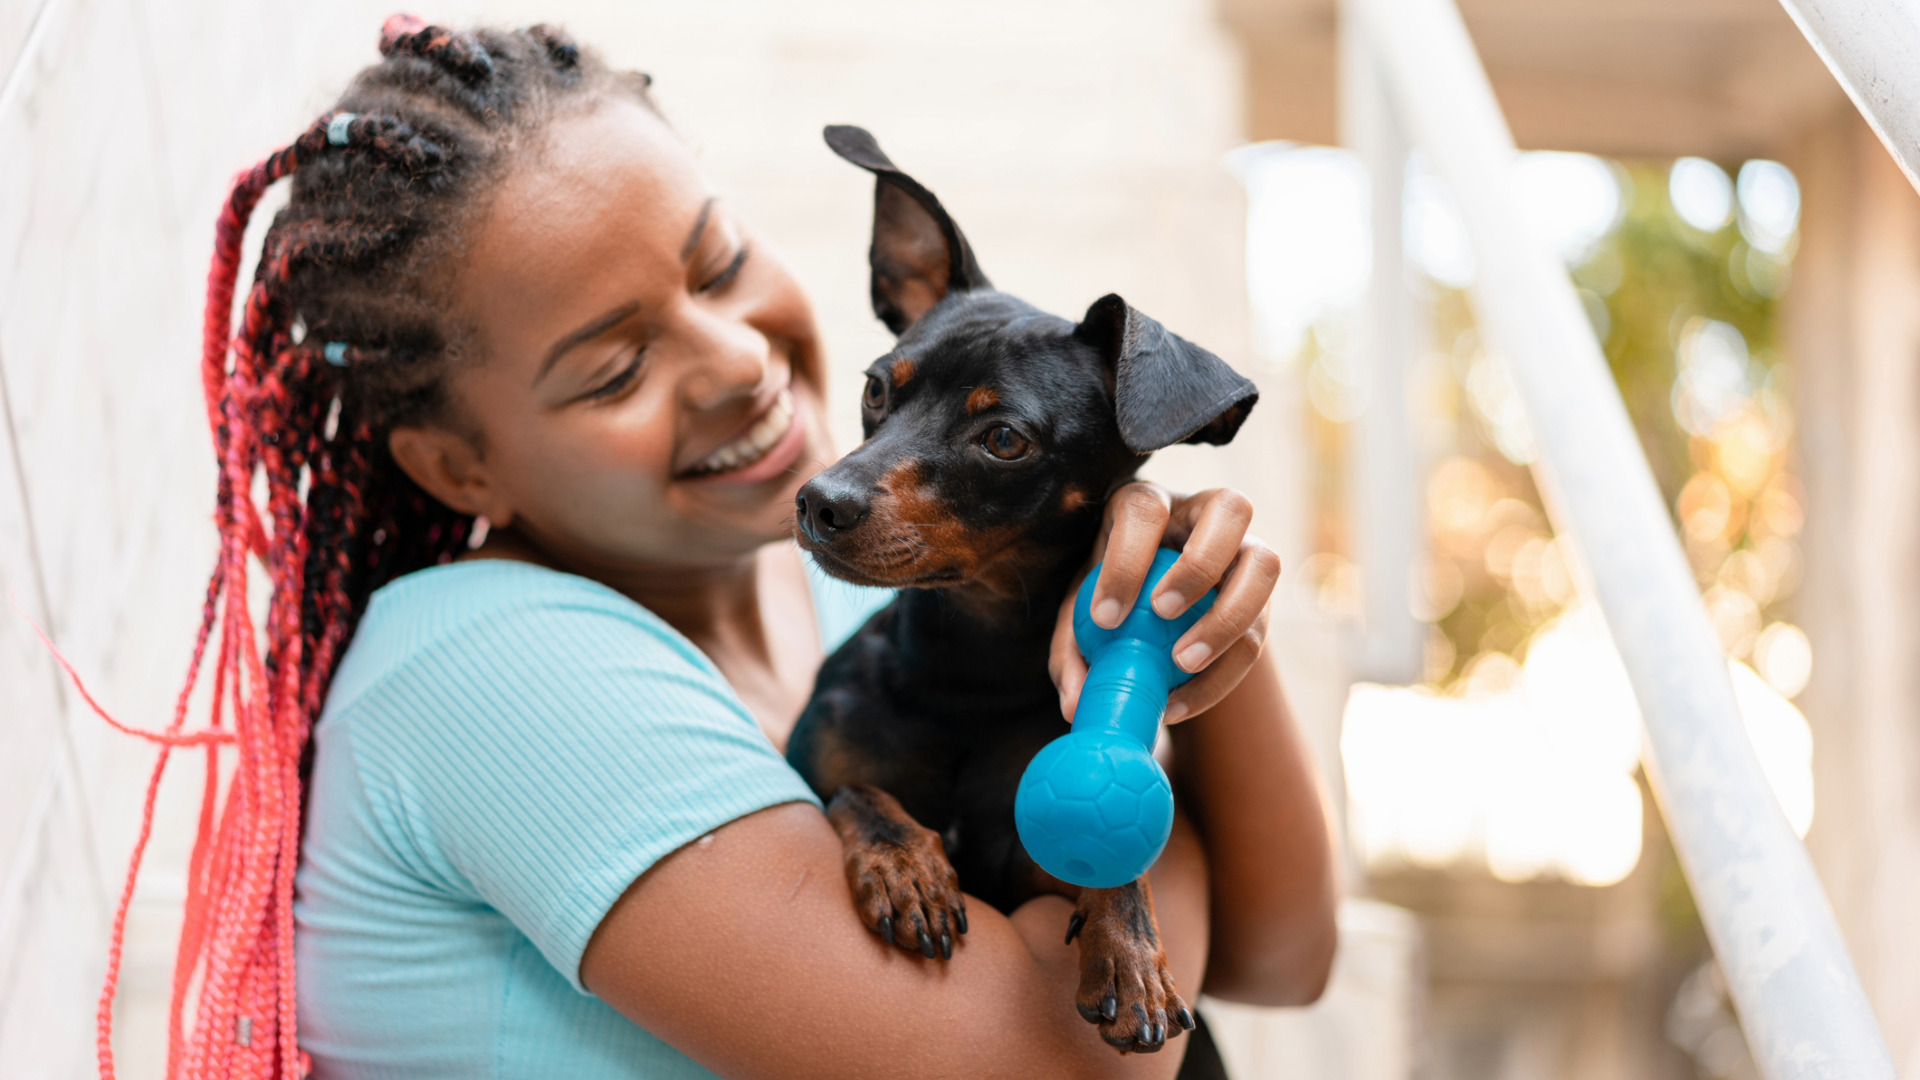 smiling woman holds a small black and brown dog and a blue dog toy